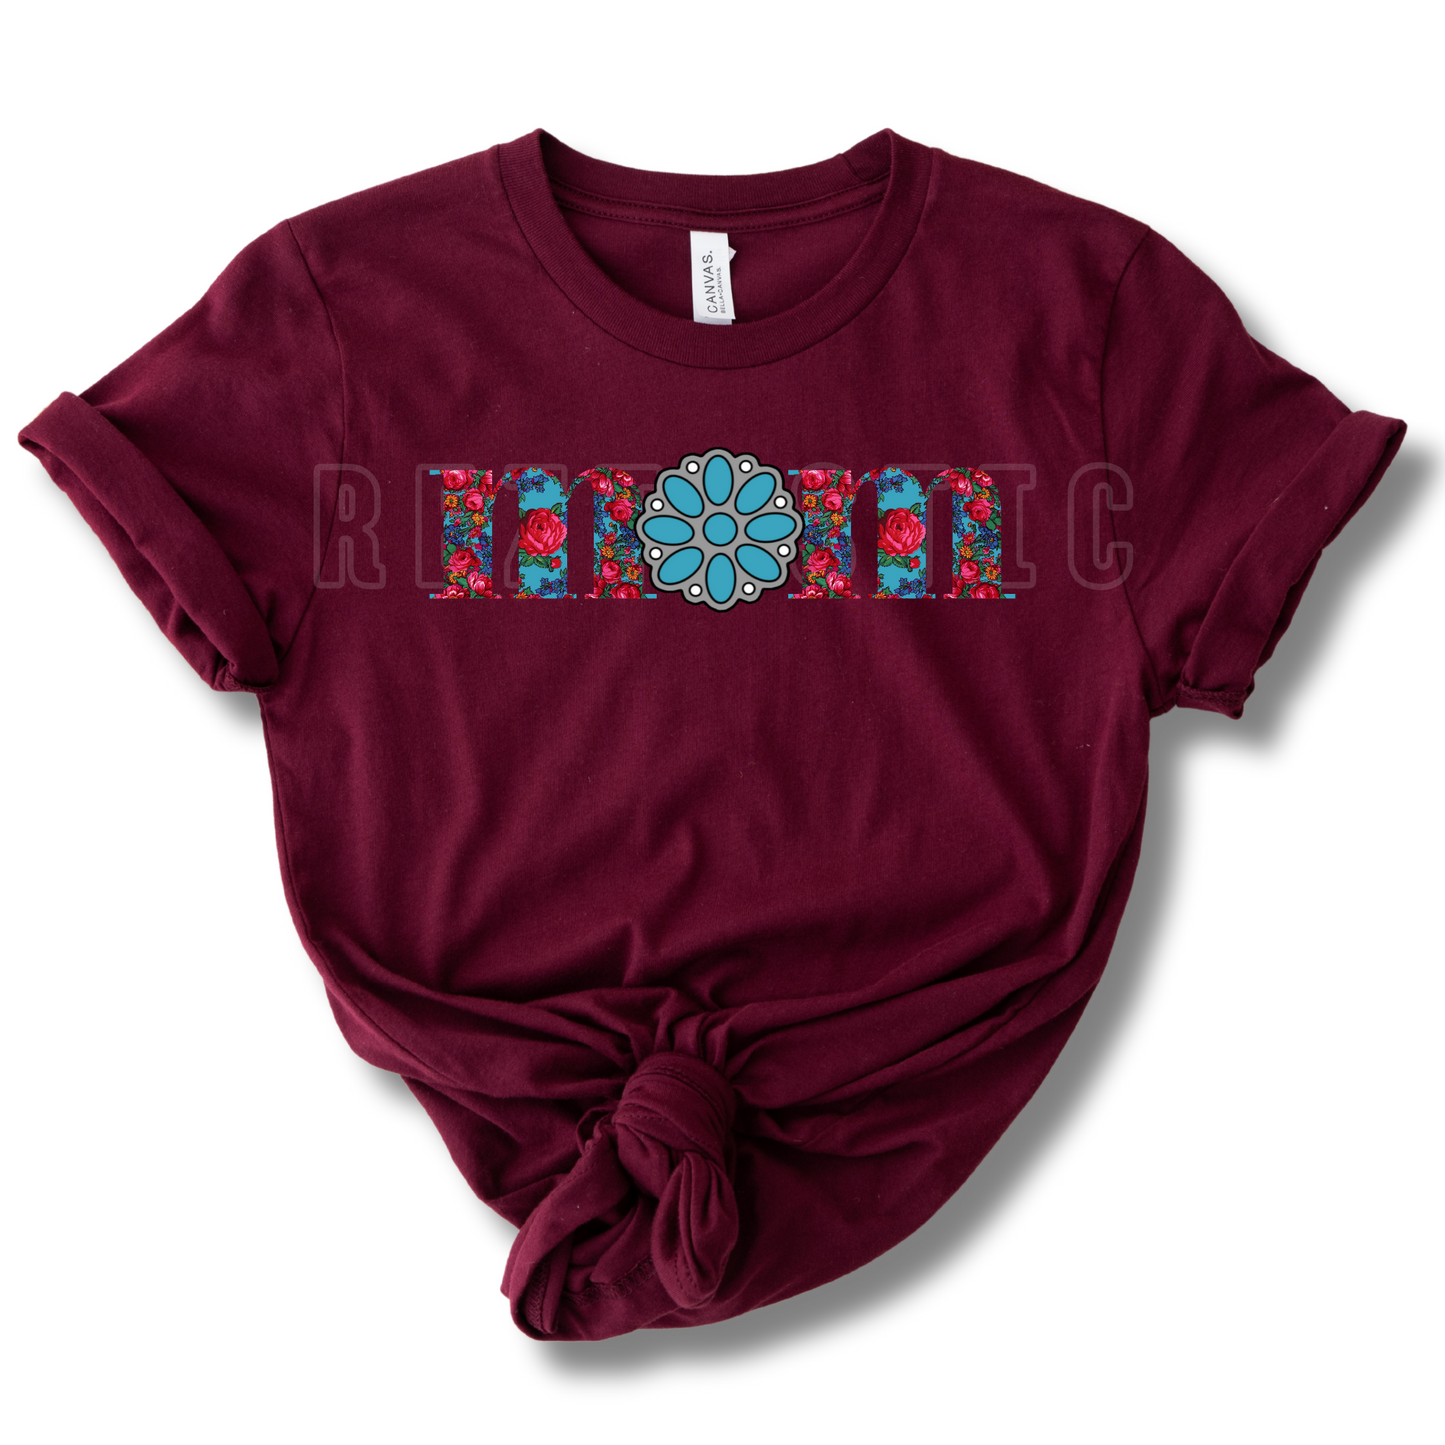 Turquoise Mom - T-Shirt - Adult